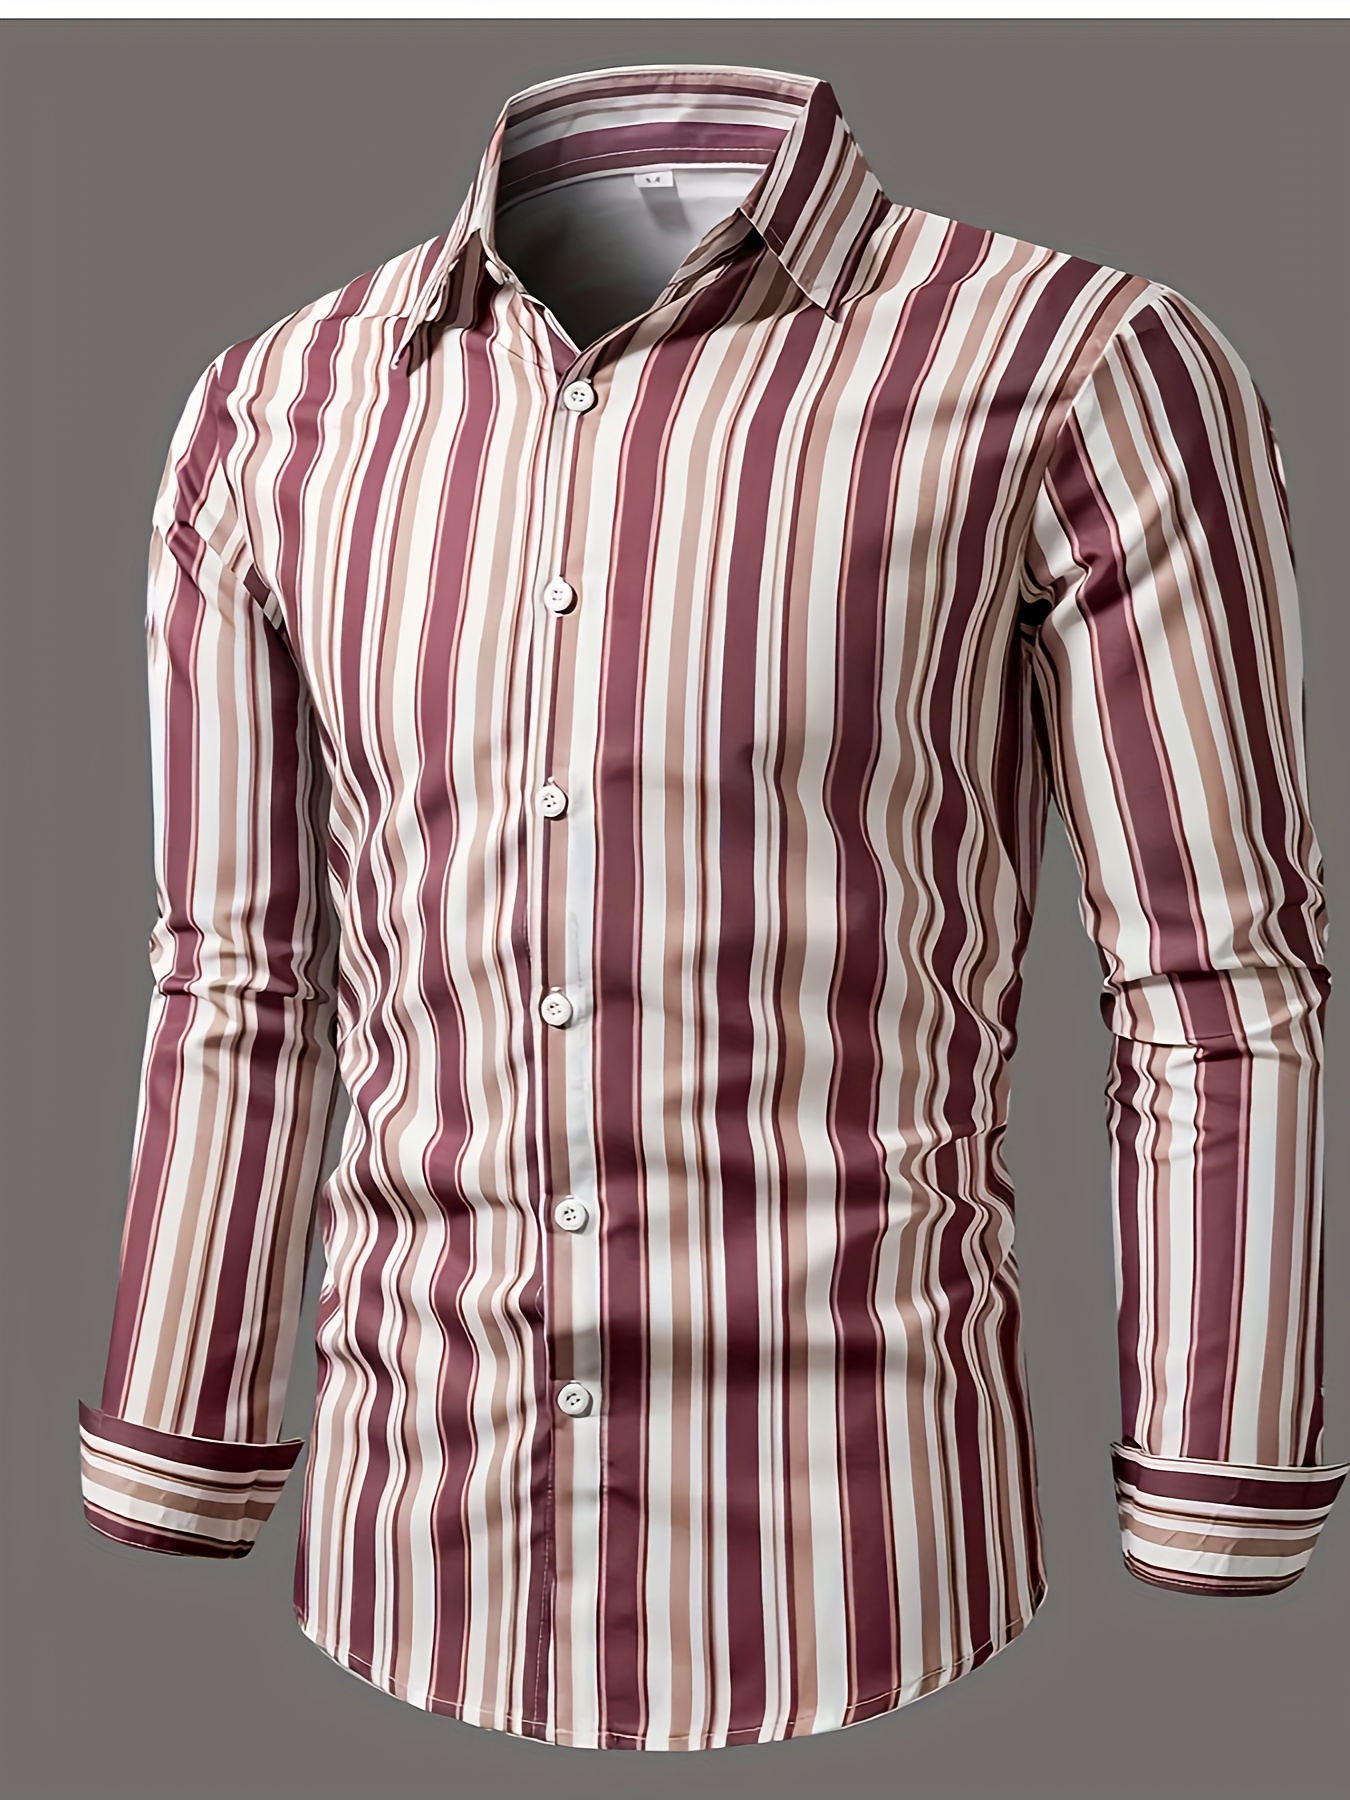 mens classic design striped long sleeve button up shirt for business occasions spring fall mens clothing details 10